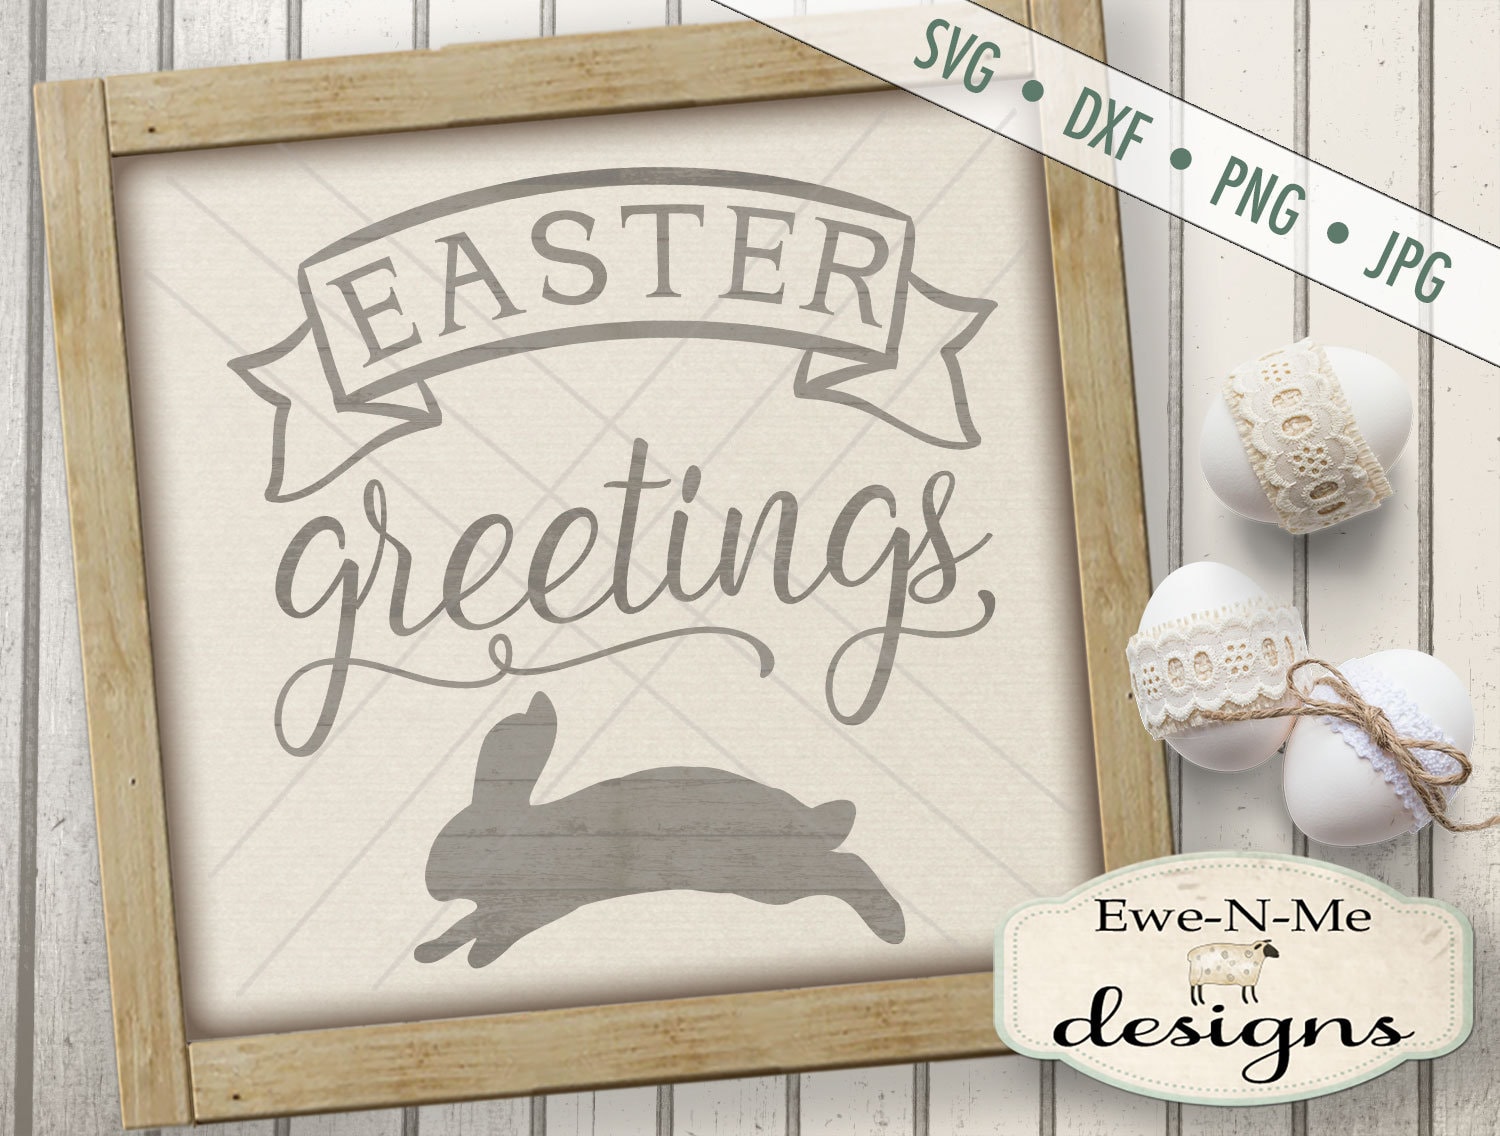 Easter SVG - Easter greetings svg - Happy Easter SVG - bunny silhouette